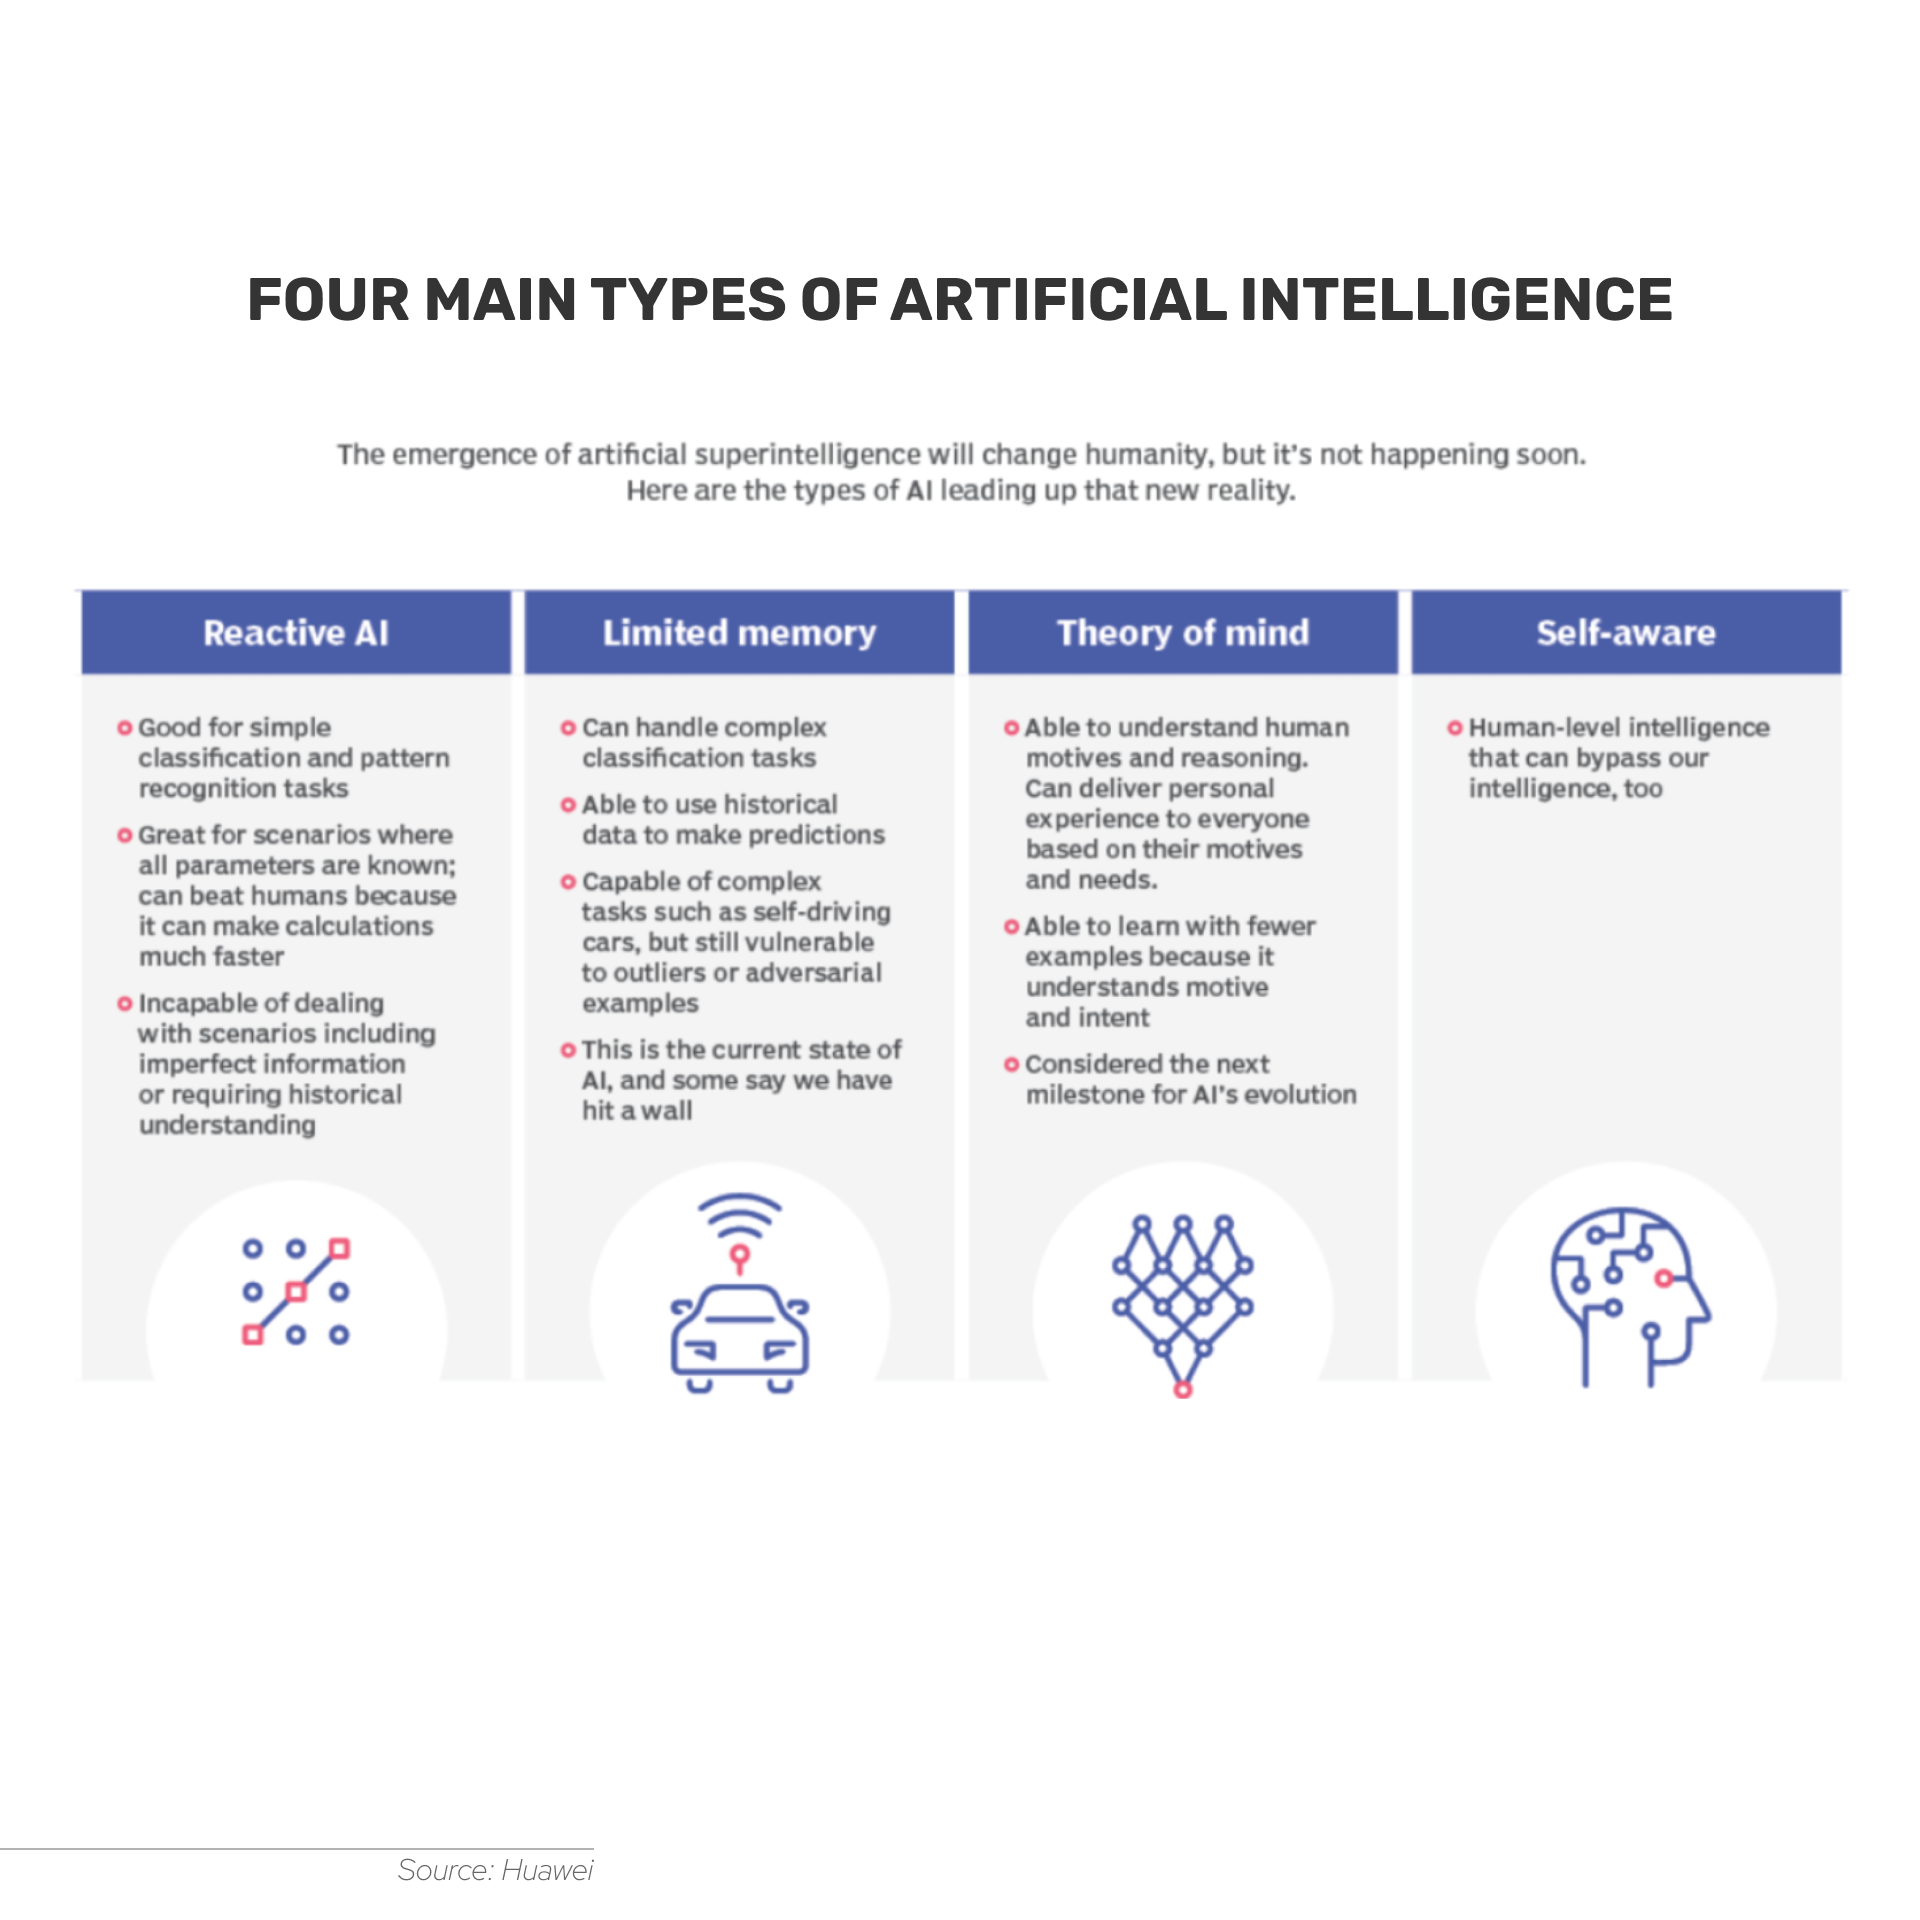 Based on the main AI capabilities, experts identify four main types of Artificial Intelligence such as Reactive AI, Limited Memory AI, Theory of Mind AI, and Self-aware AI.